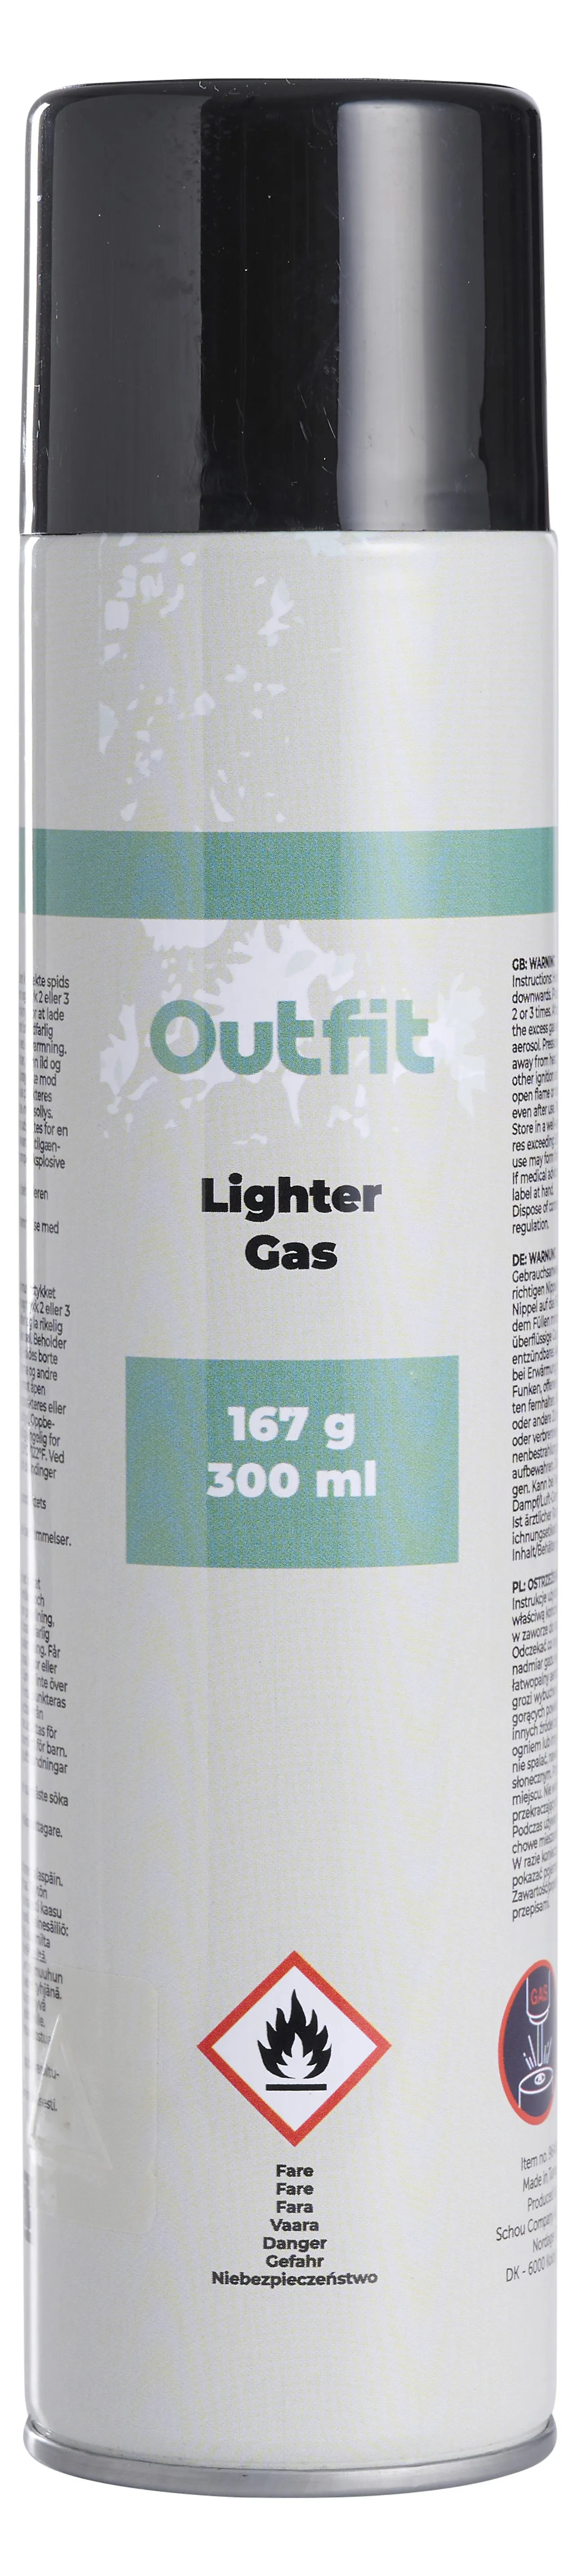 Gass for lighter 300ml outfit